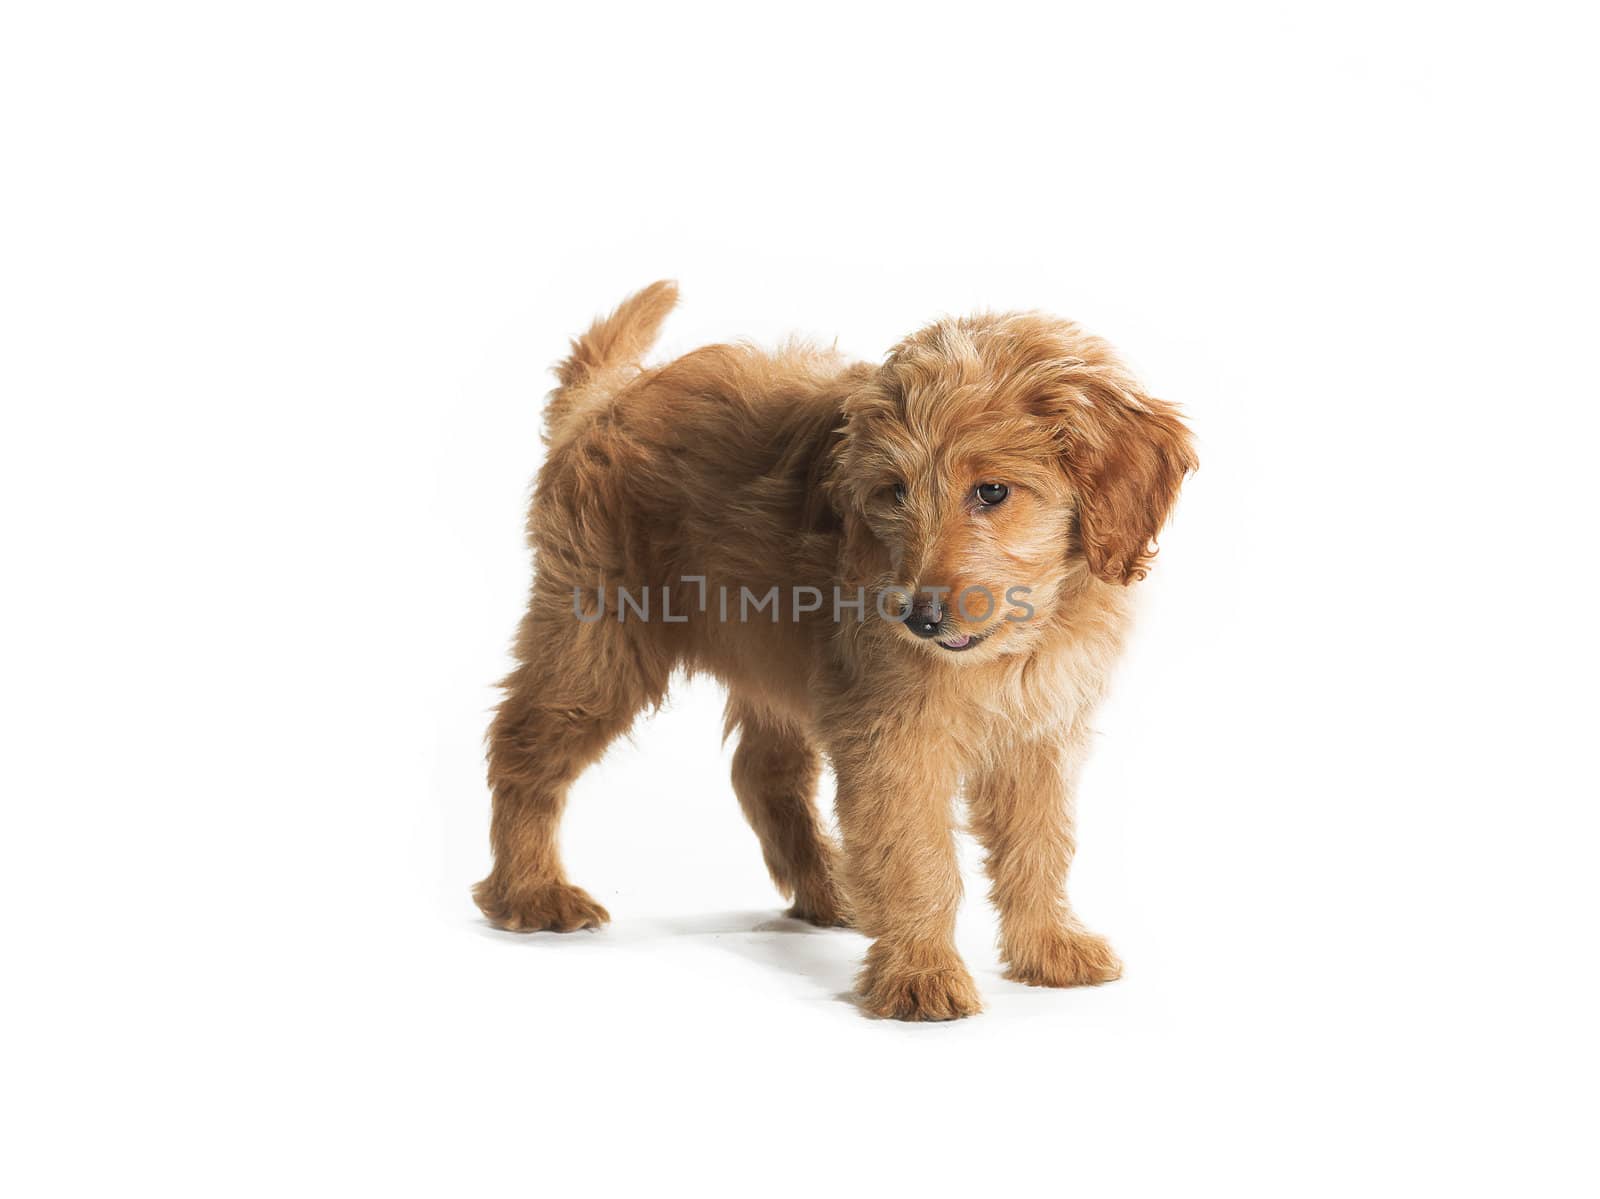 A cute fluffy putting isolated on white.